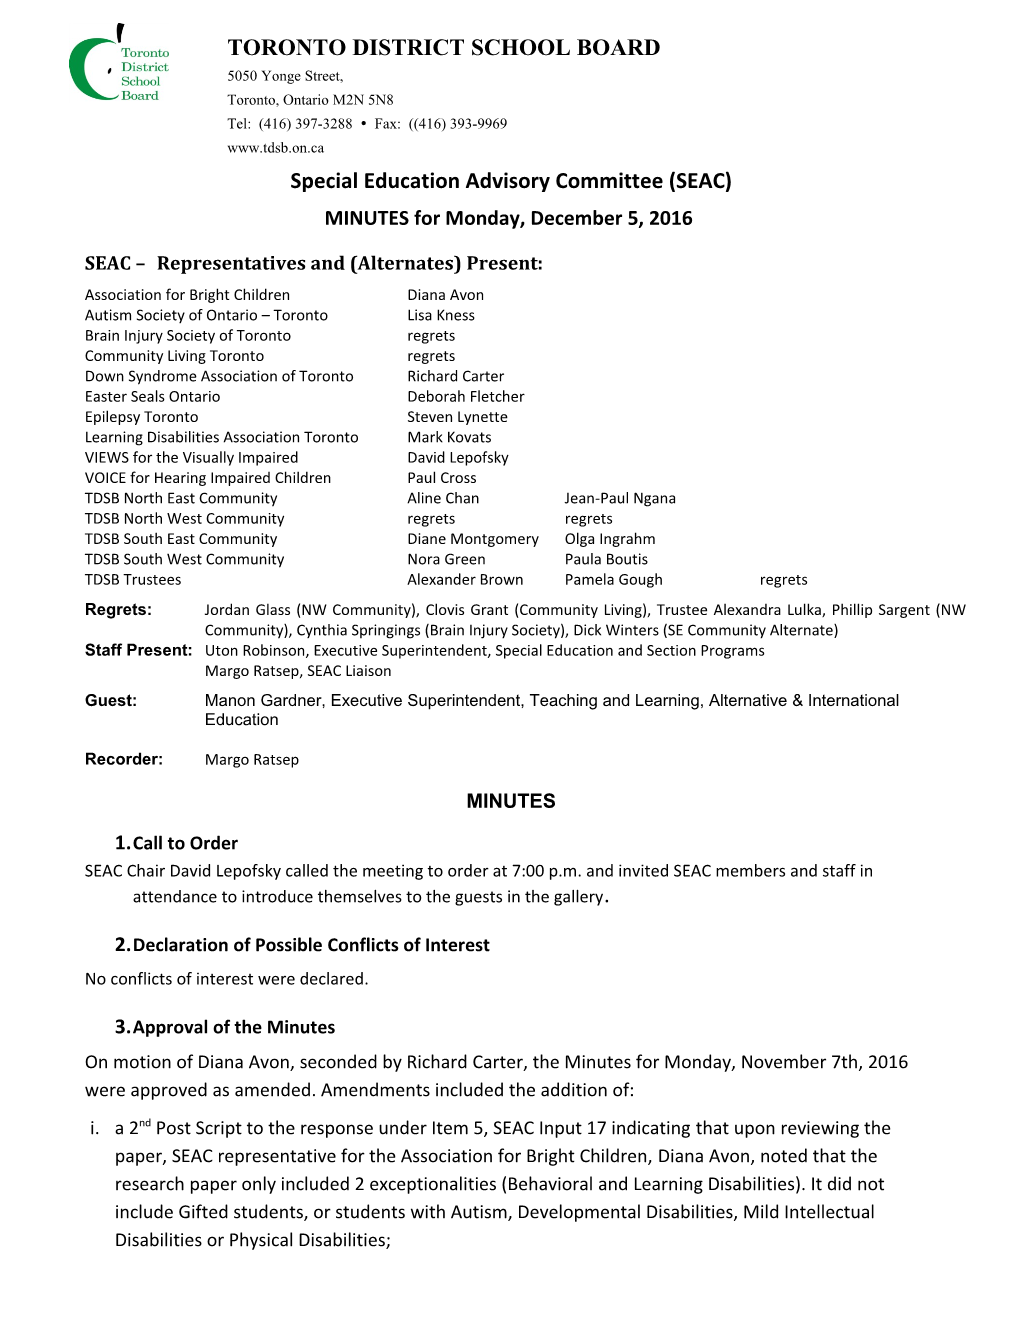 Special Education Advisory Committee (SEAC) TDSB Special Education Reform Draft Motions s1